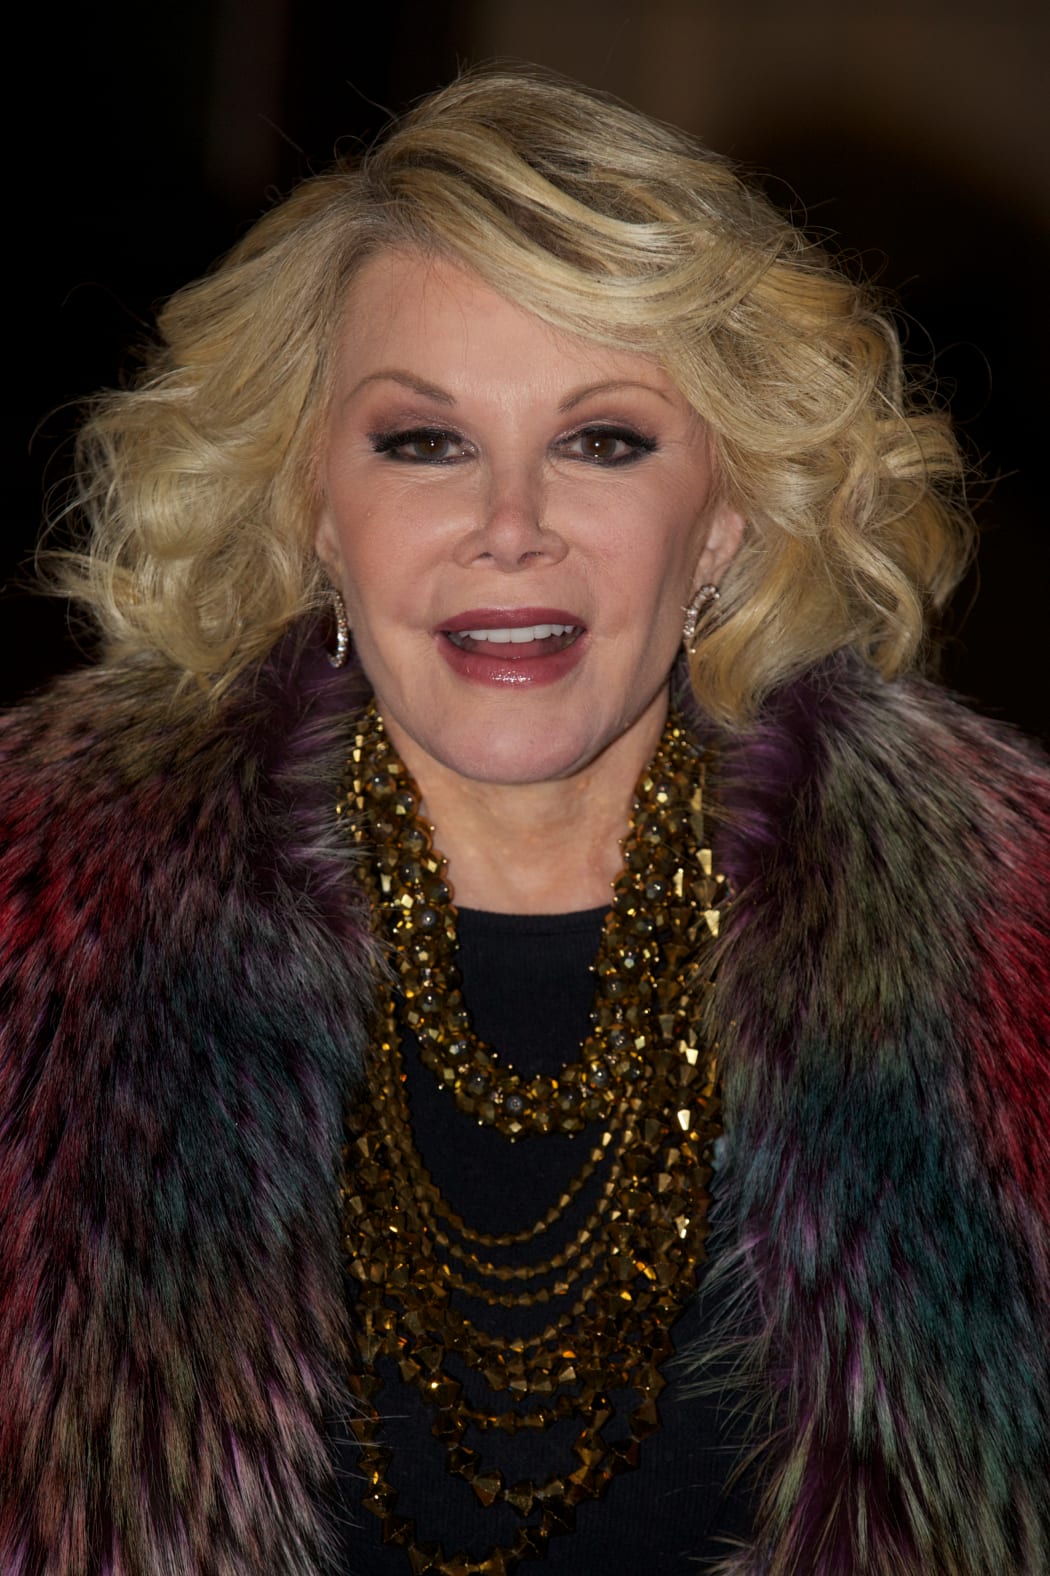 This November 28, 2012 file photo shows US television personality and comedian Joan Rivers on the red carpet as she arrives at the Prince's Trust comedy gala 'We Are Most Amused' at the Royal Albert Hall in London.